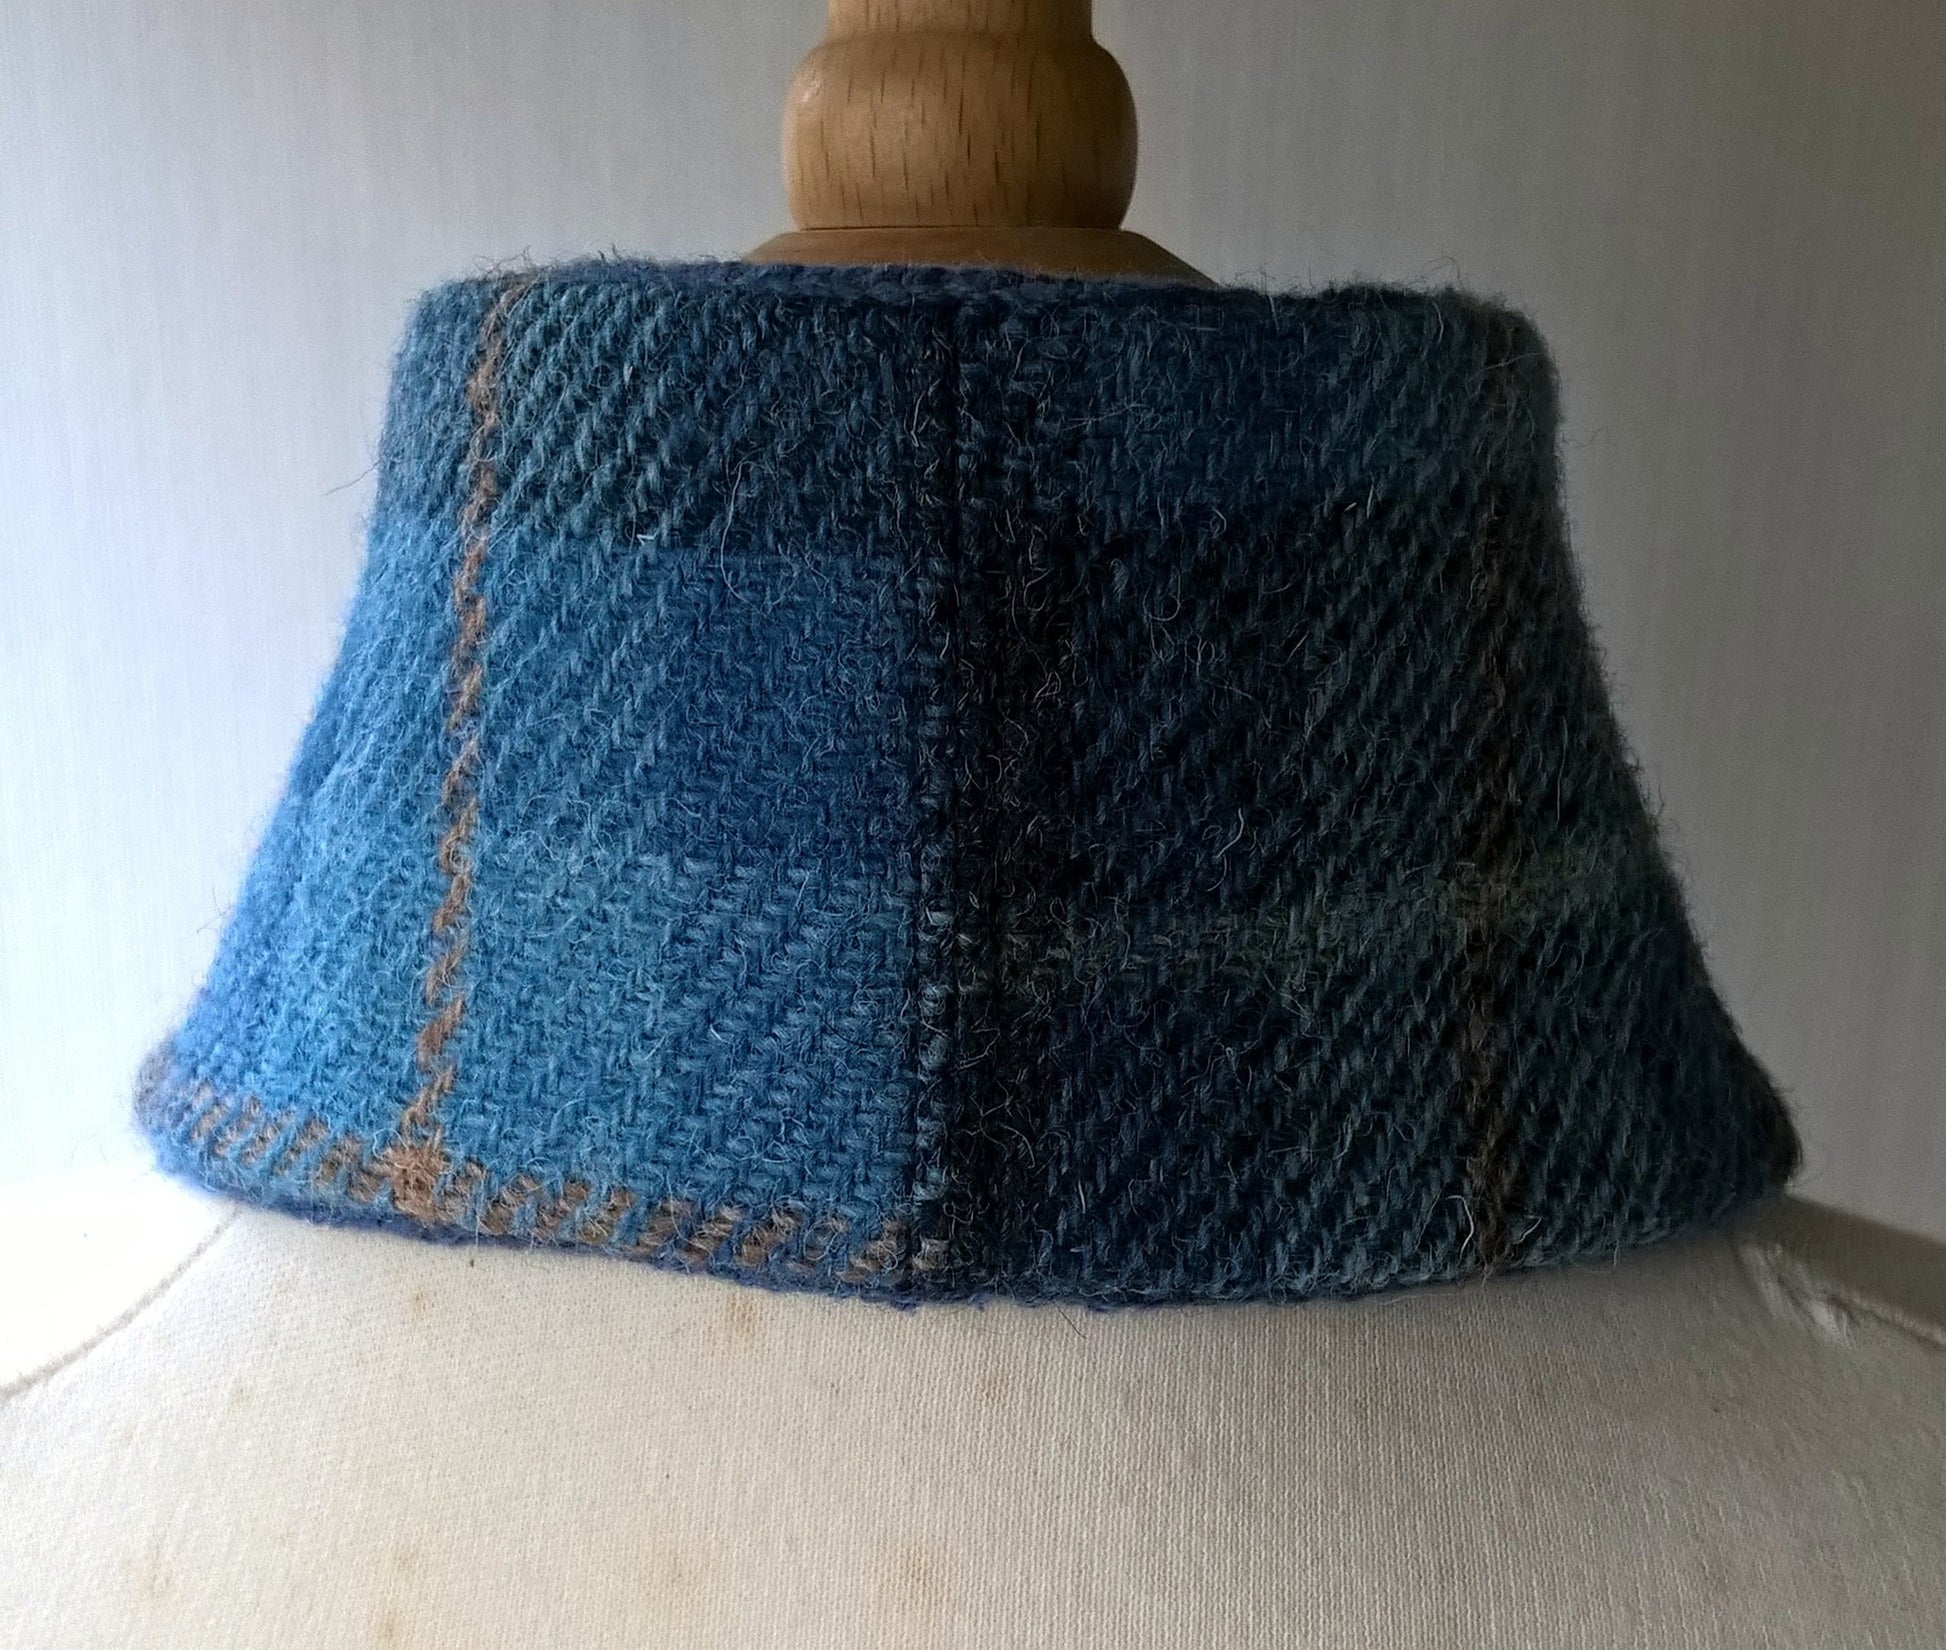 Top stitched centre back neck of wool scarf